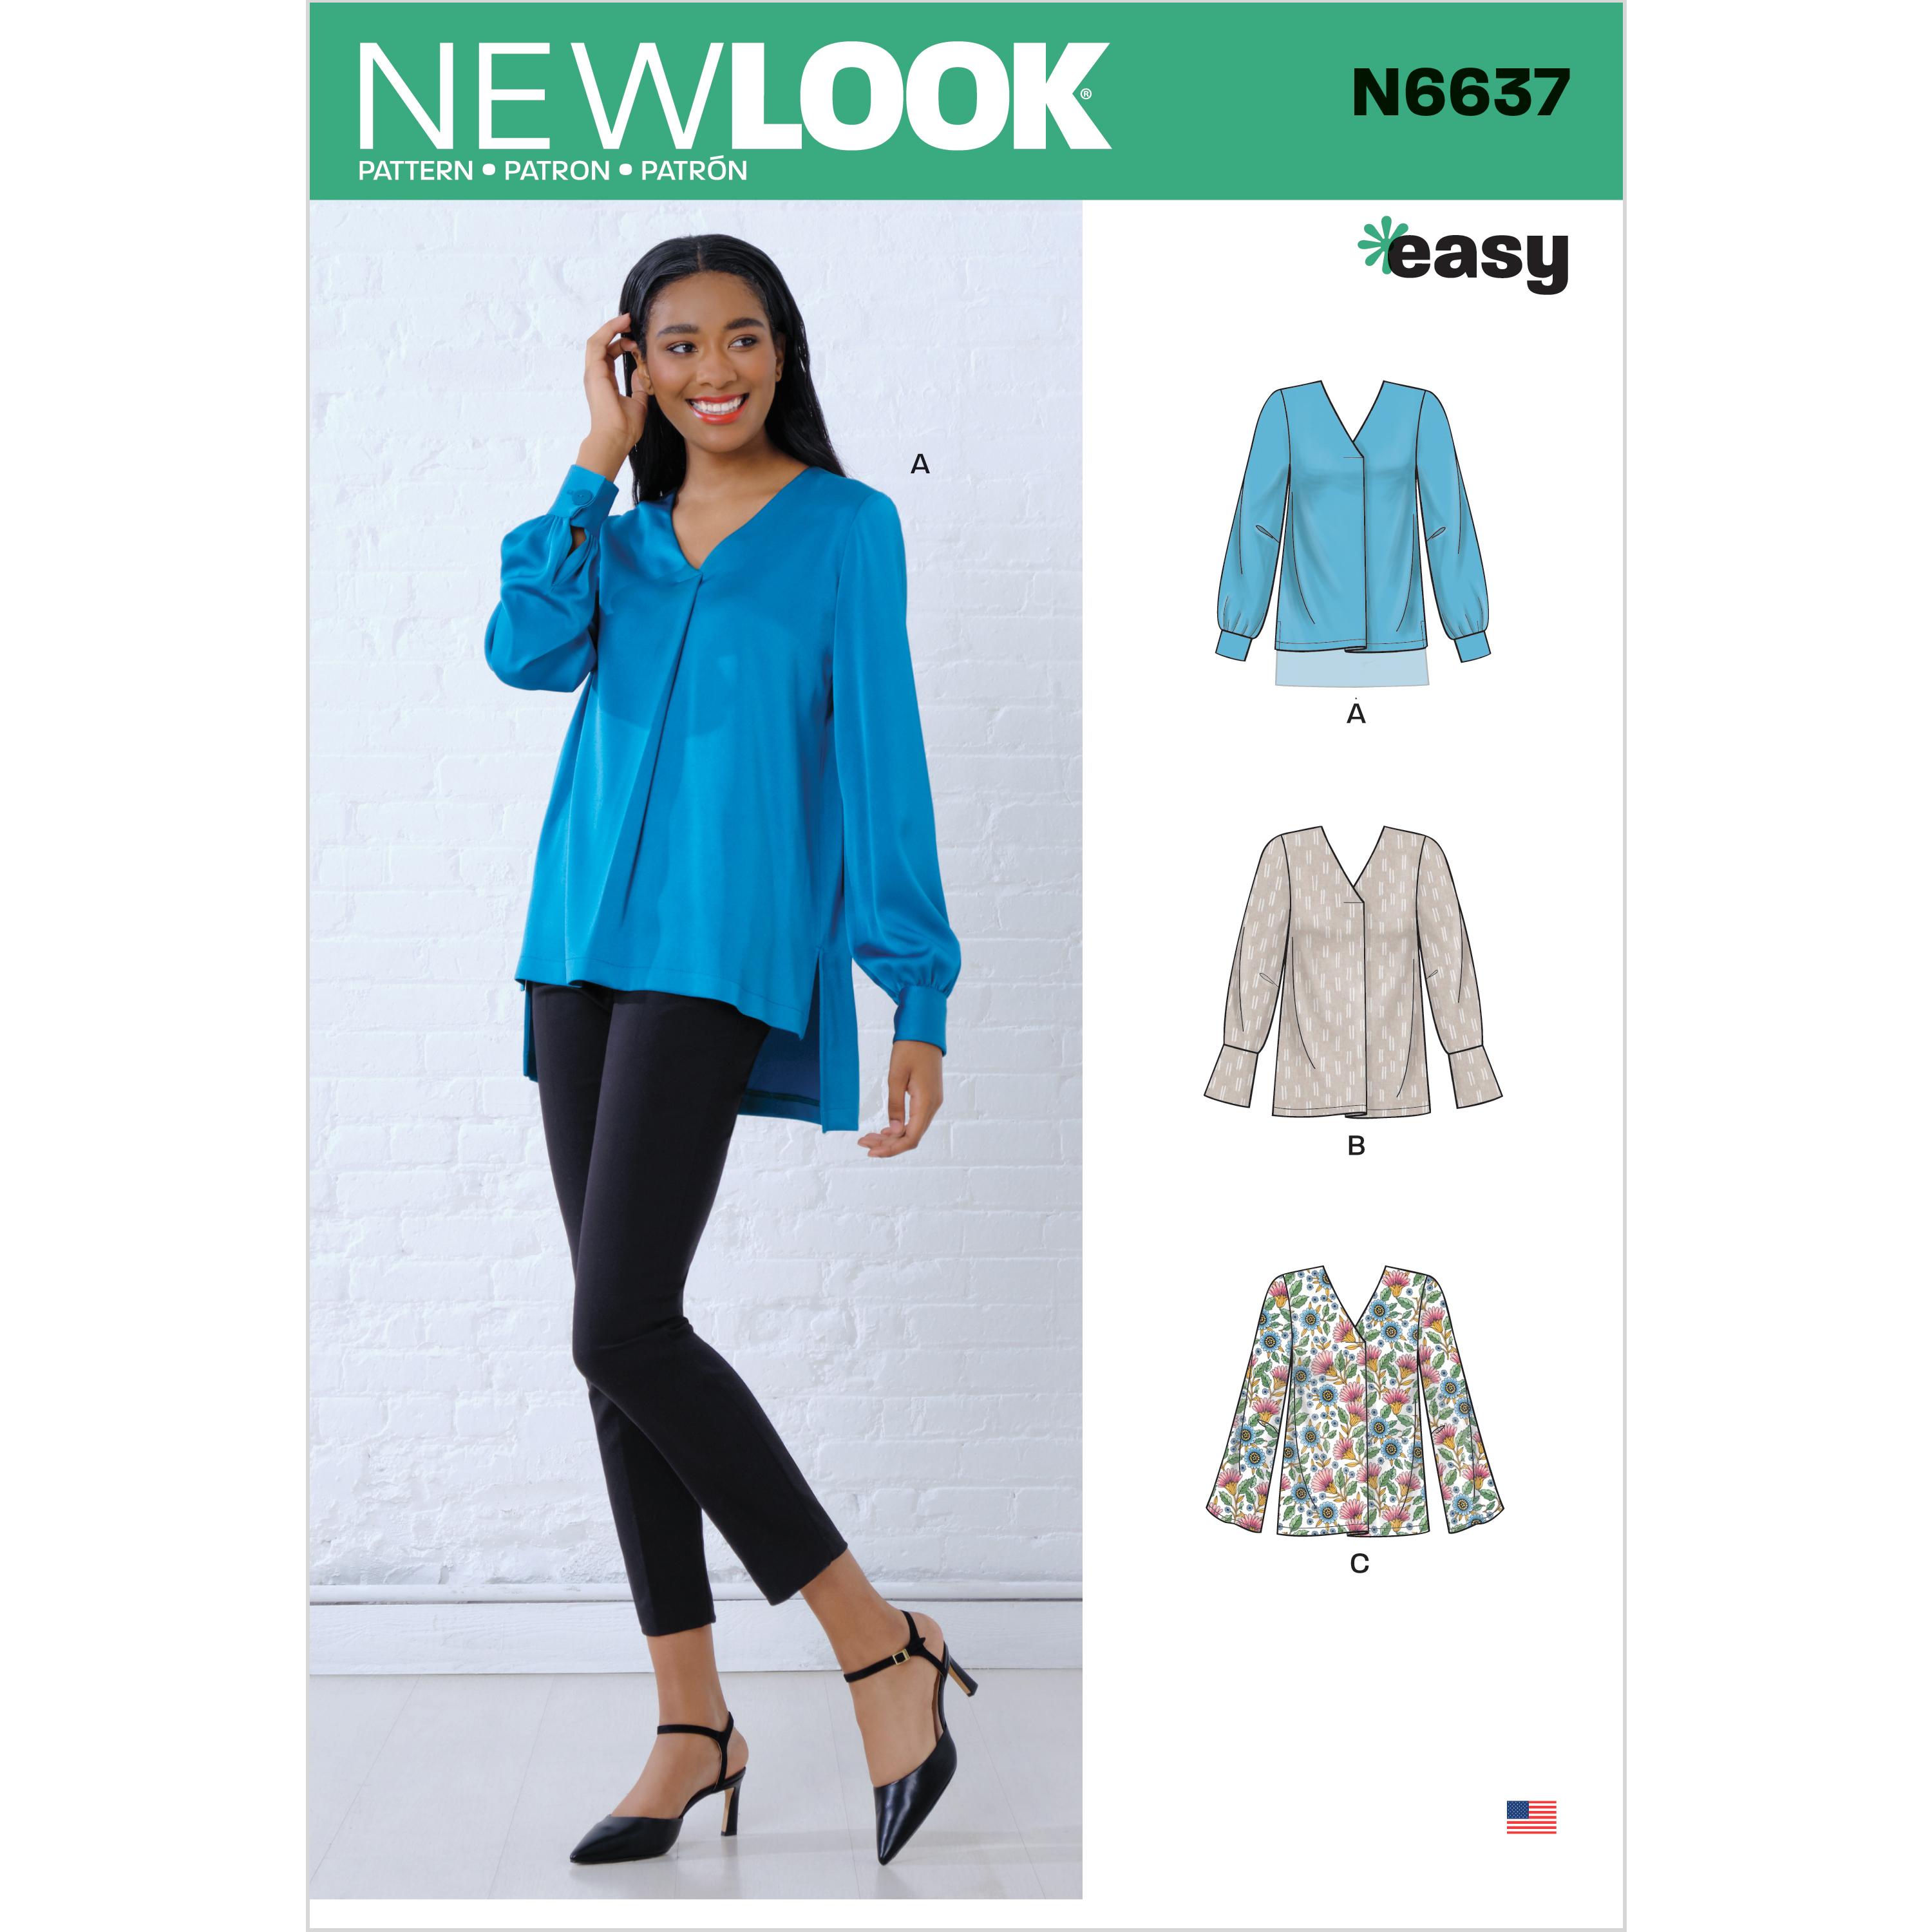 NewLook Sewing Pattern N6637 Misses' Loose Fitting Blouses